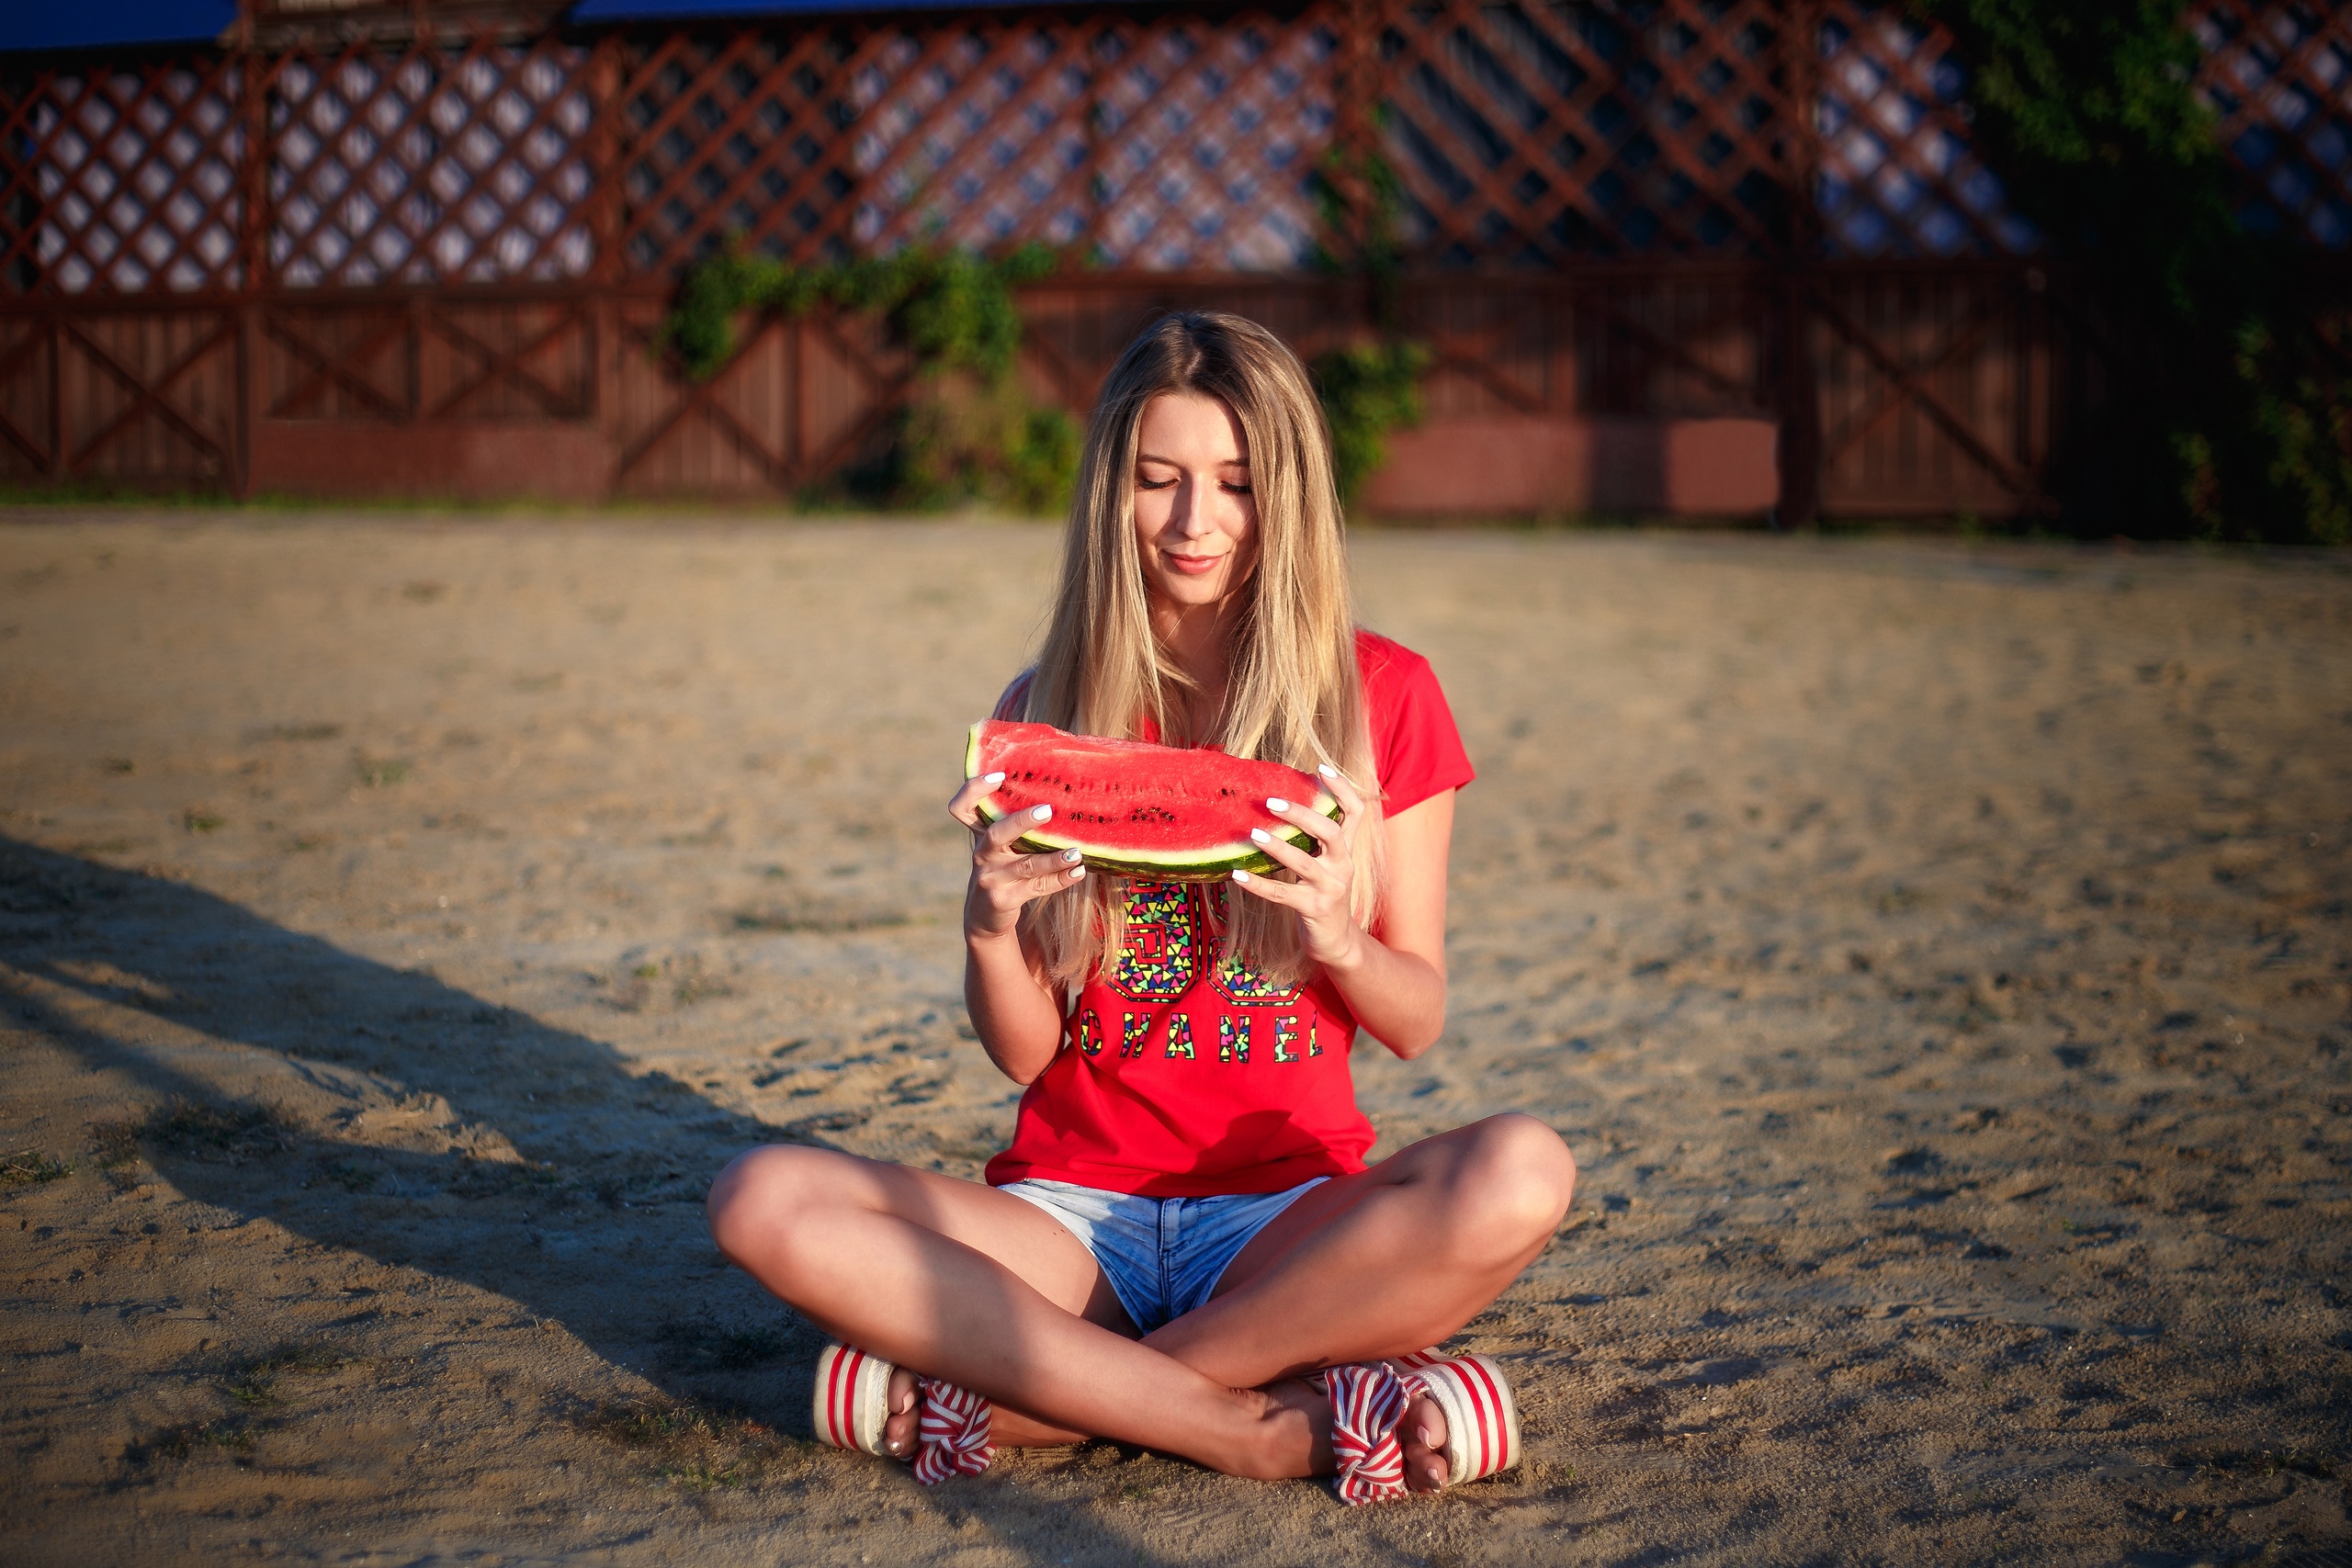 People 2560x1707 women model blonde portrait outdoors depth of field sitting on the floor jean shorts T-shirt watermelons smiling women outdoors food legs crossed long hair painted nails